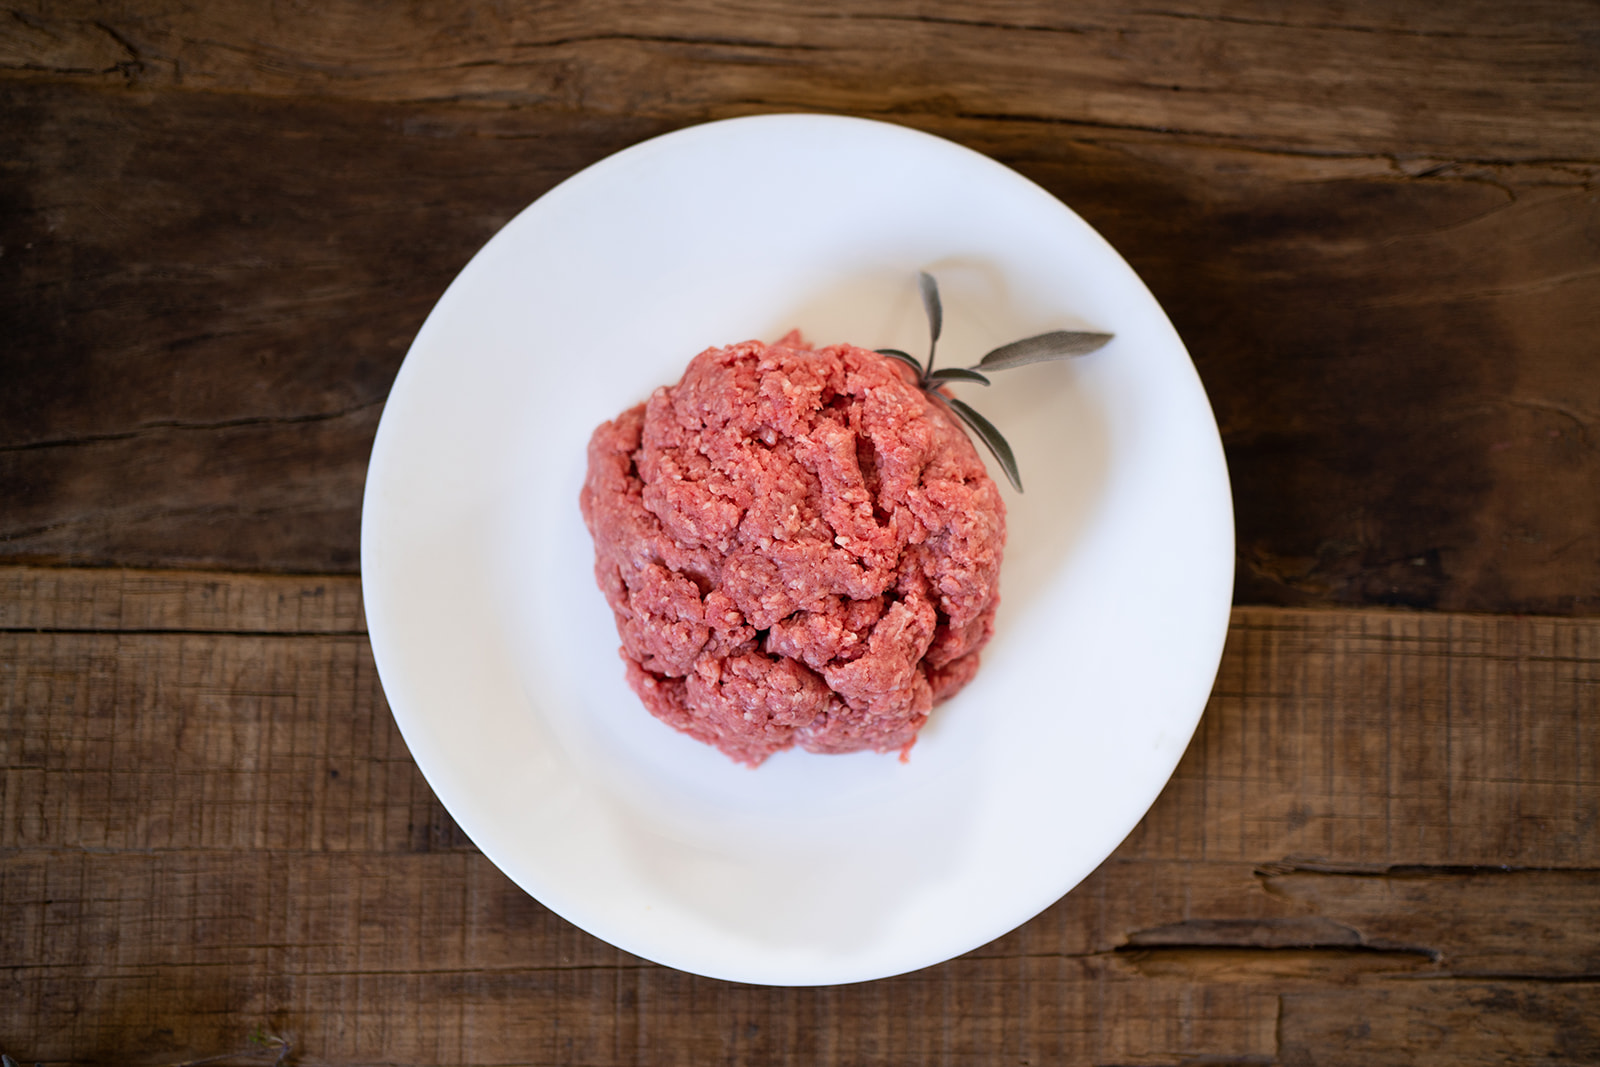 80/20 raw ground beef on white plate